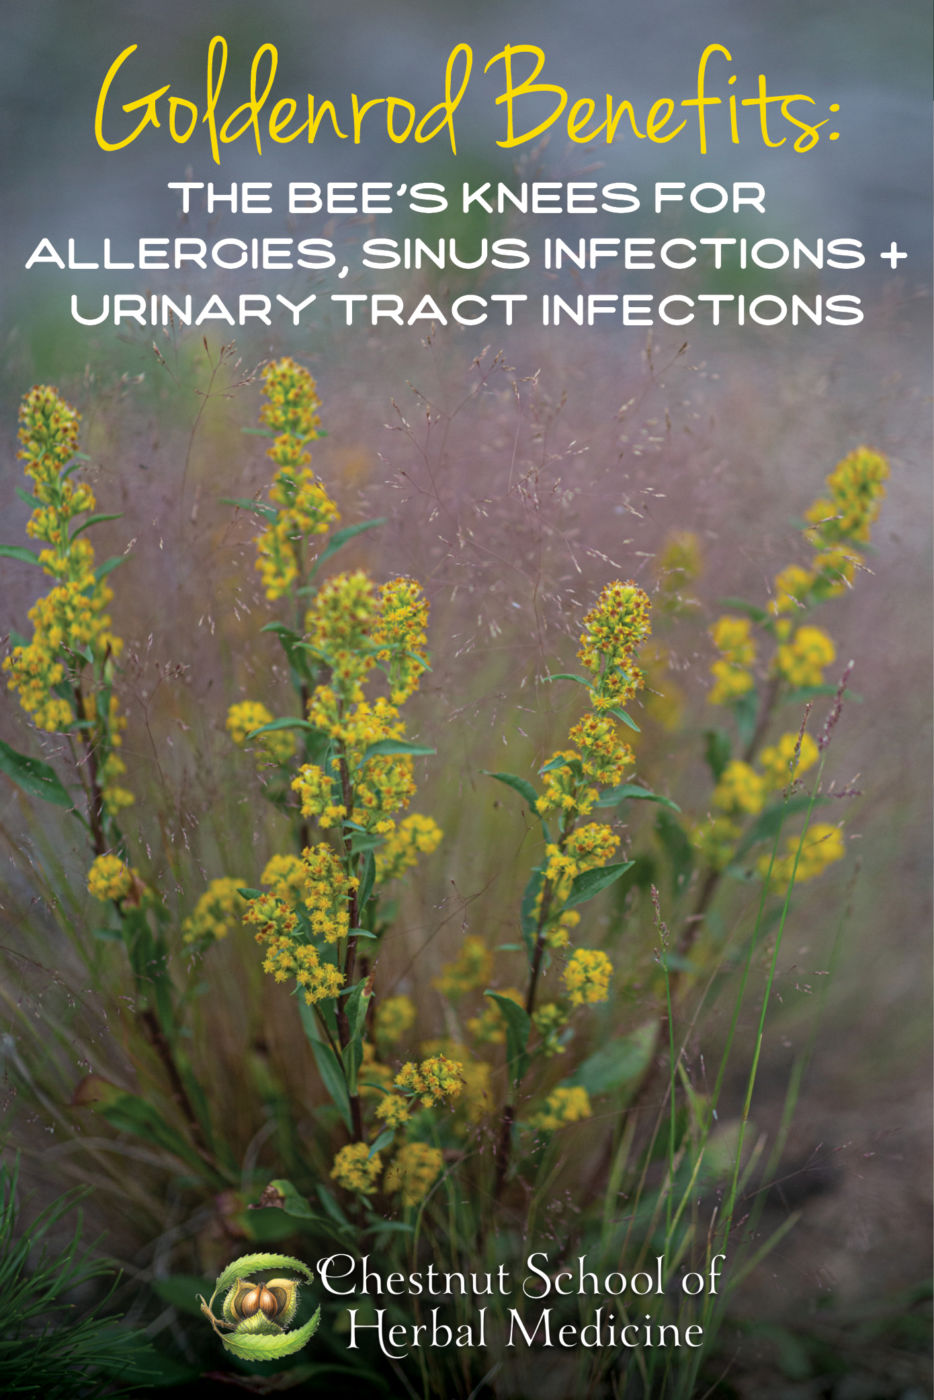 Goldenrod Benefits: The Bee’s Knees for Allergies, Sinus Infections, and Urinary Tract Infections